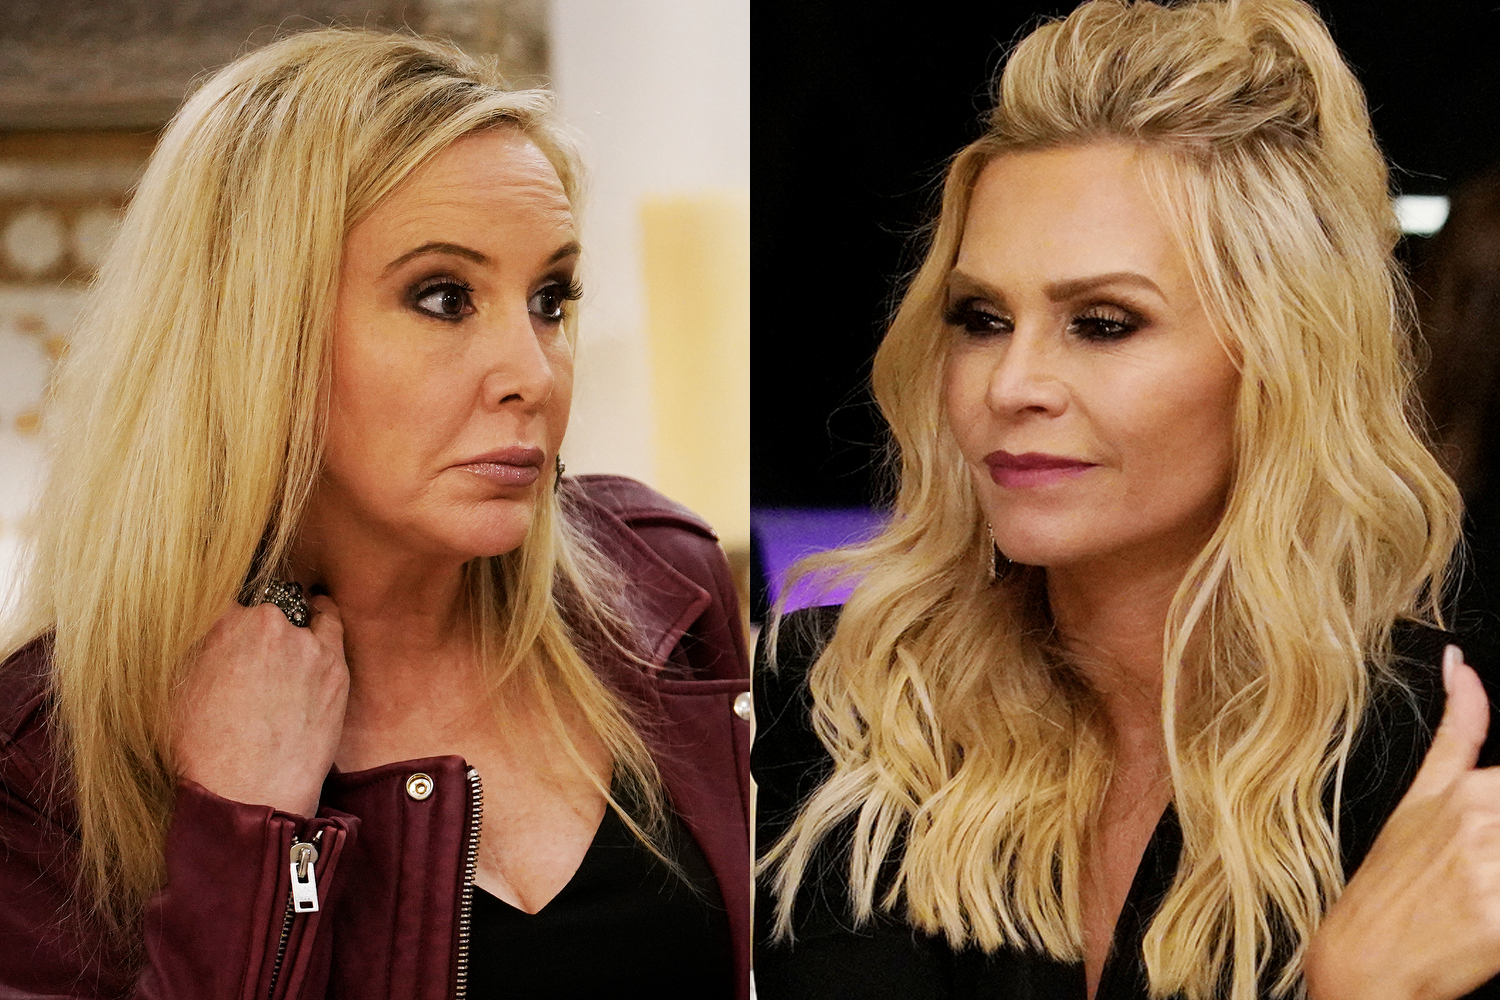 ‘RHOC’: Tamra Judge Calls Shannon Beador a ‘Liar’ and ‘Exhausting’ After Latest Accusations